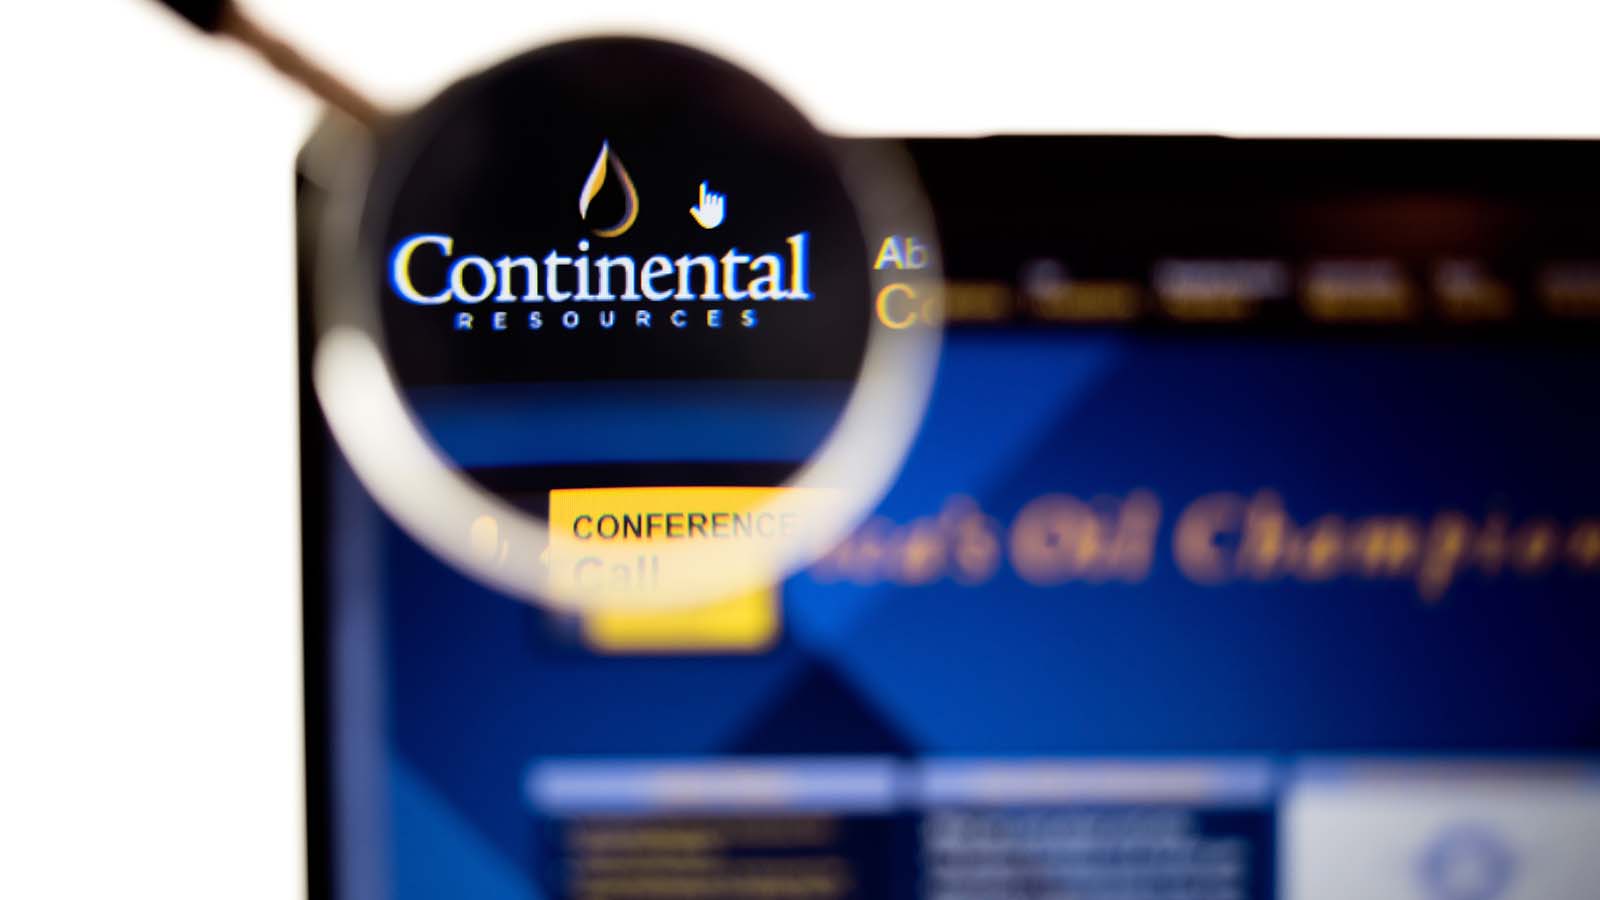 Continental Resources (CLR) Stock Jumps on Buyout Offer | InvestorPlace